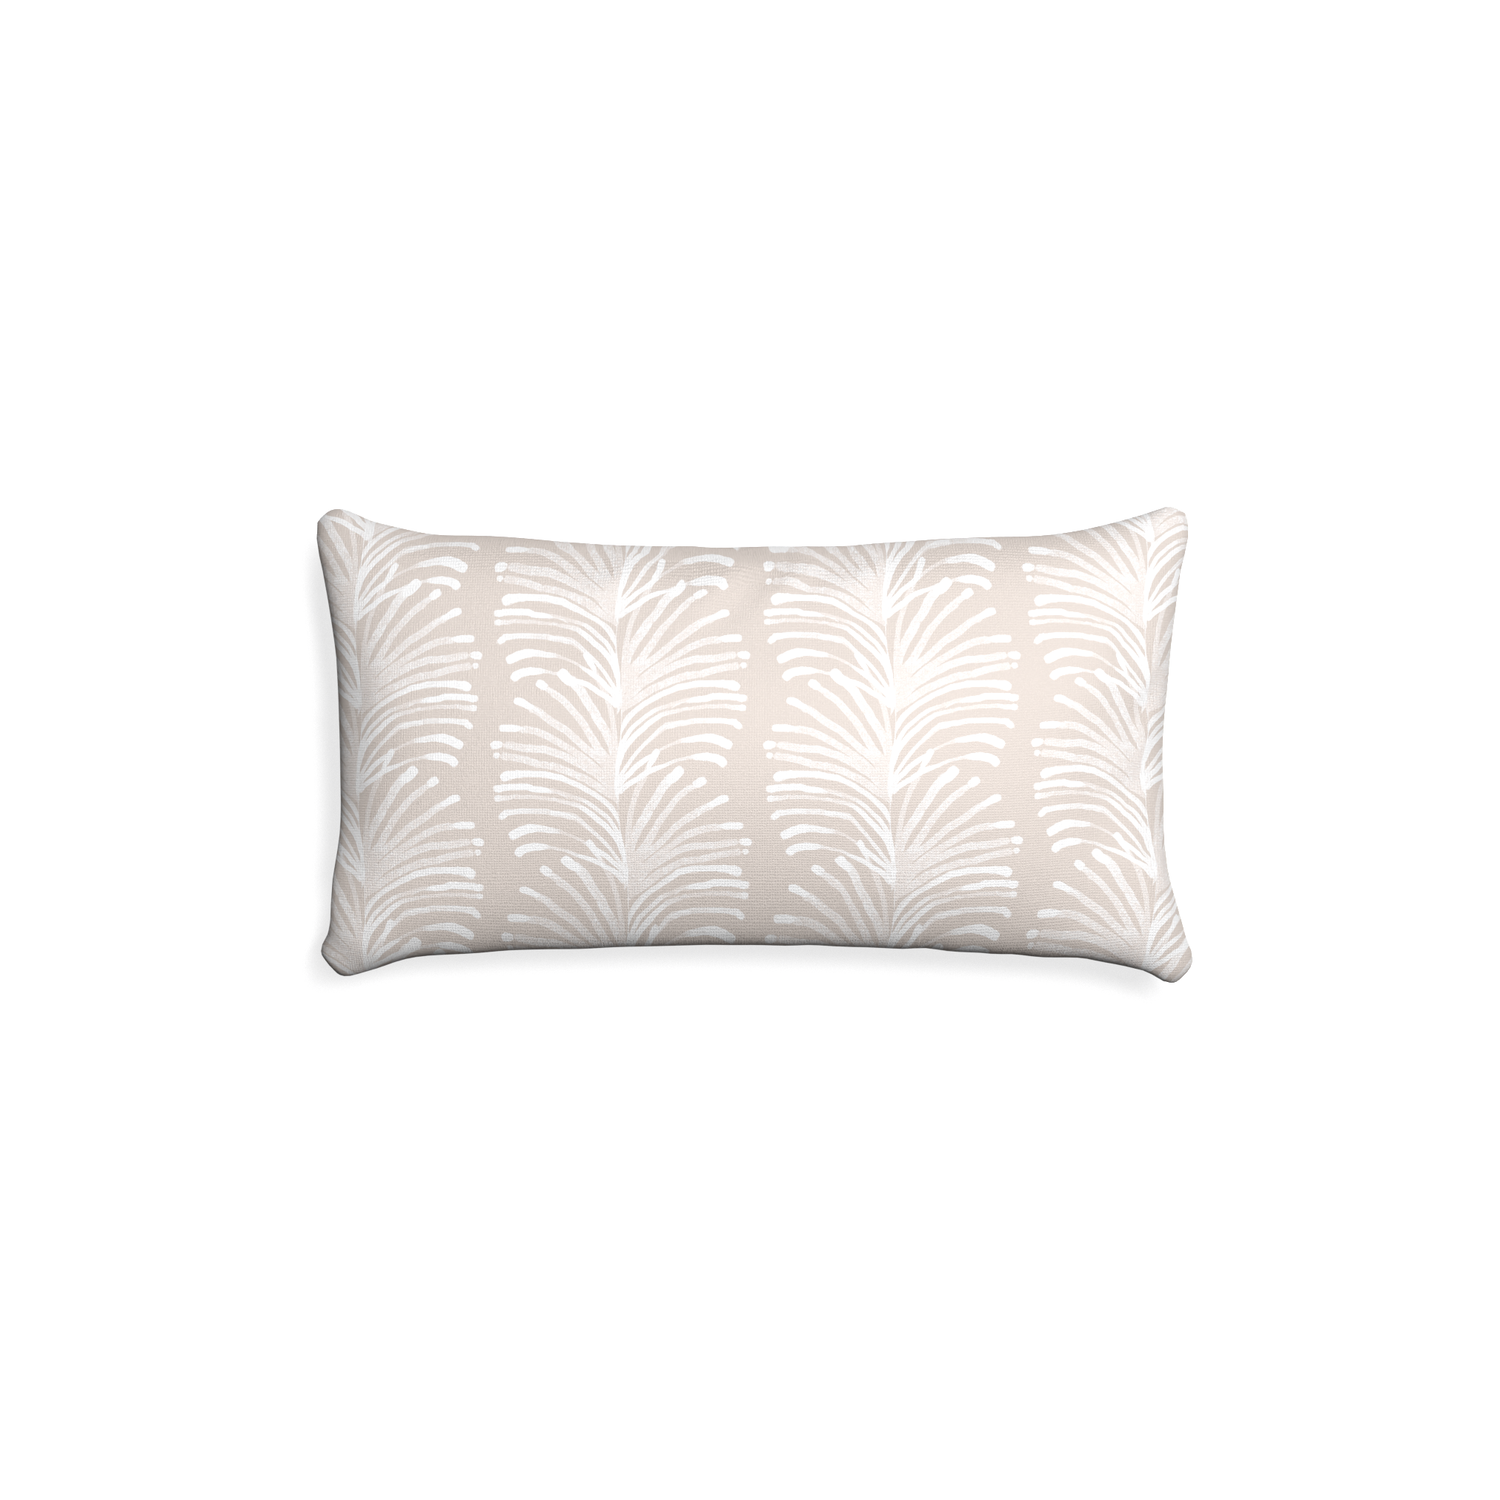 Petite-lumbar emma sand custom sand colored botanical stripepillow with none on white background